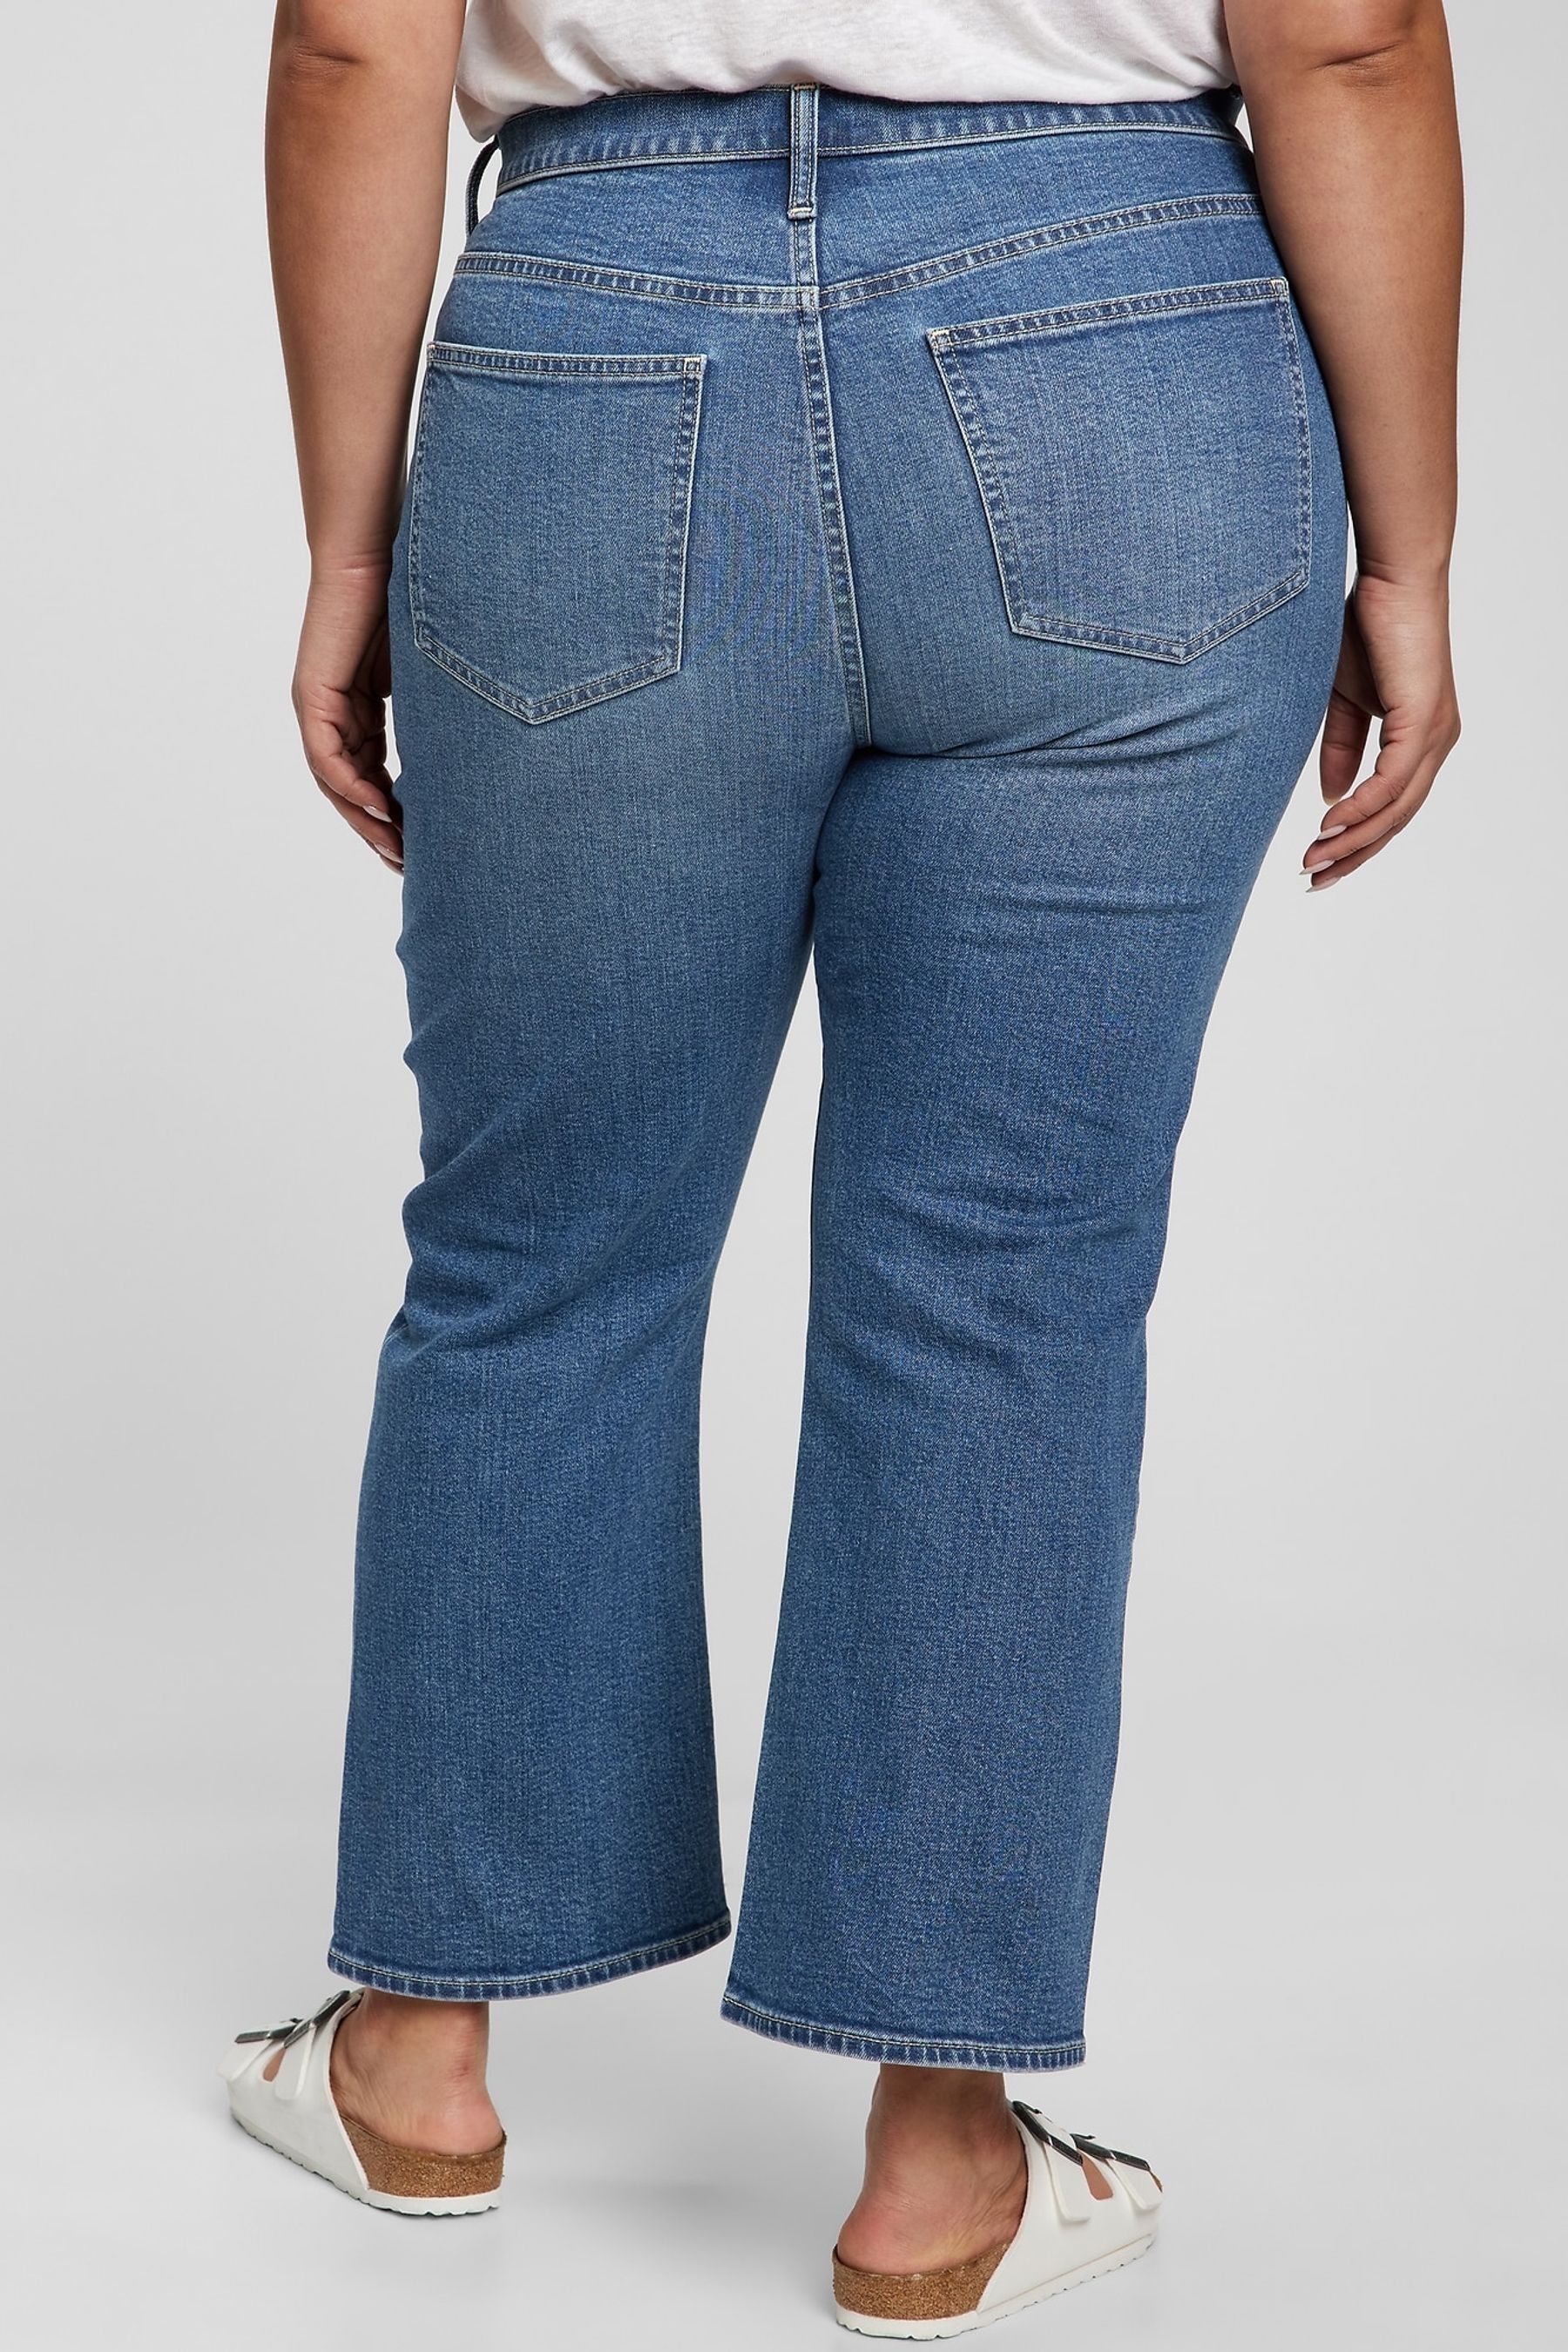 Buy Mid Wash Blue High Waisted Kick Fit Jeans from the Gap online shop